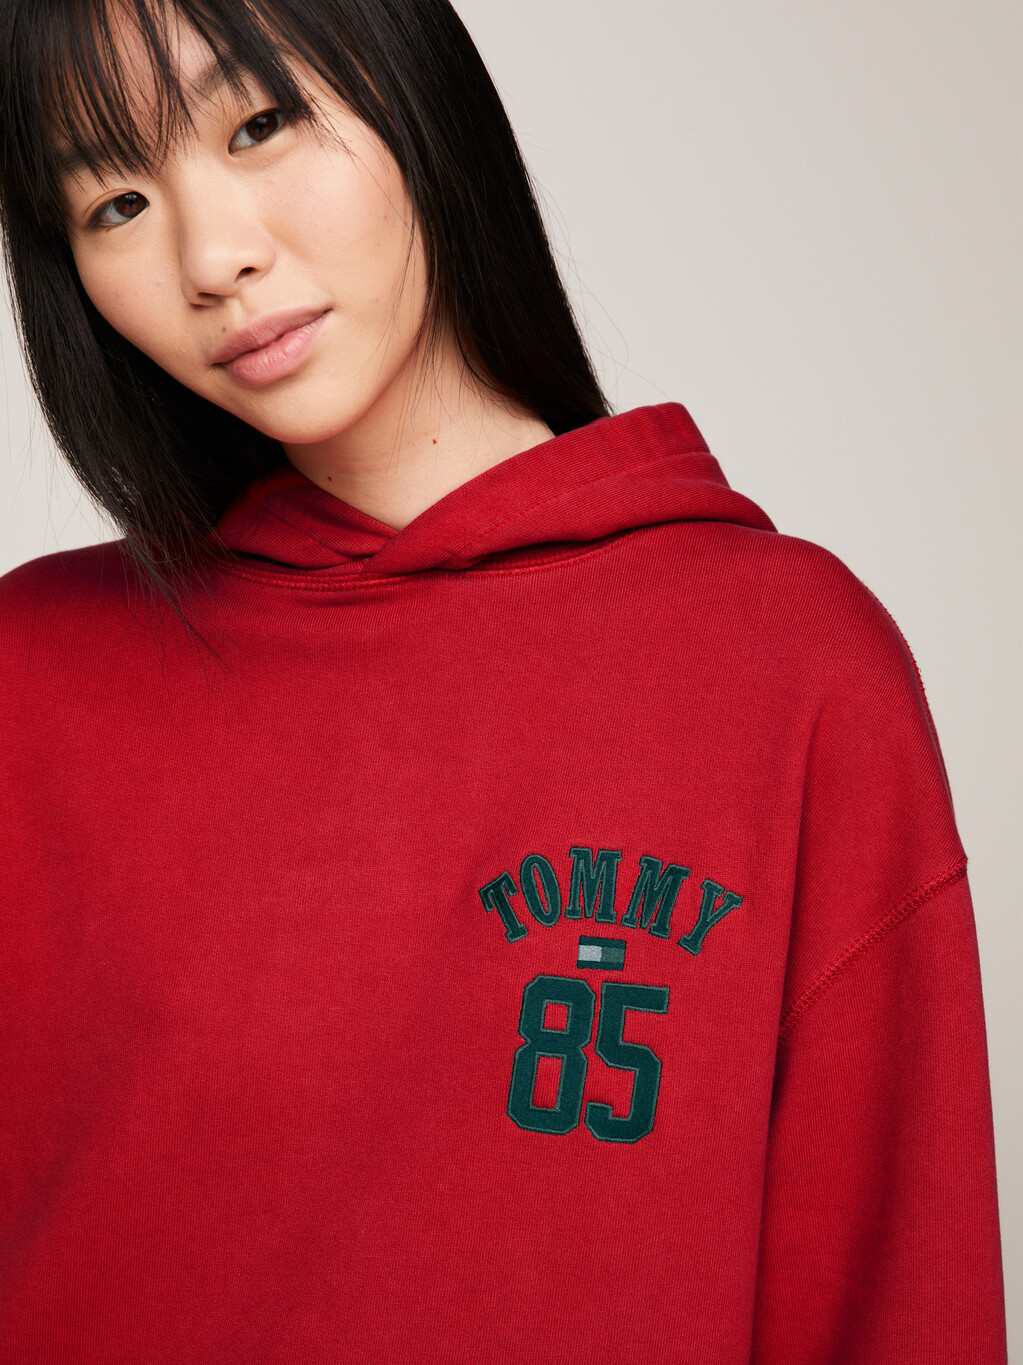 Tommy Remastered Dual Gender 1985 Collection Hoody, Medium Red, hi-res